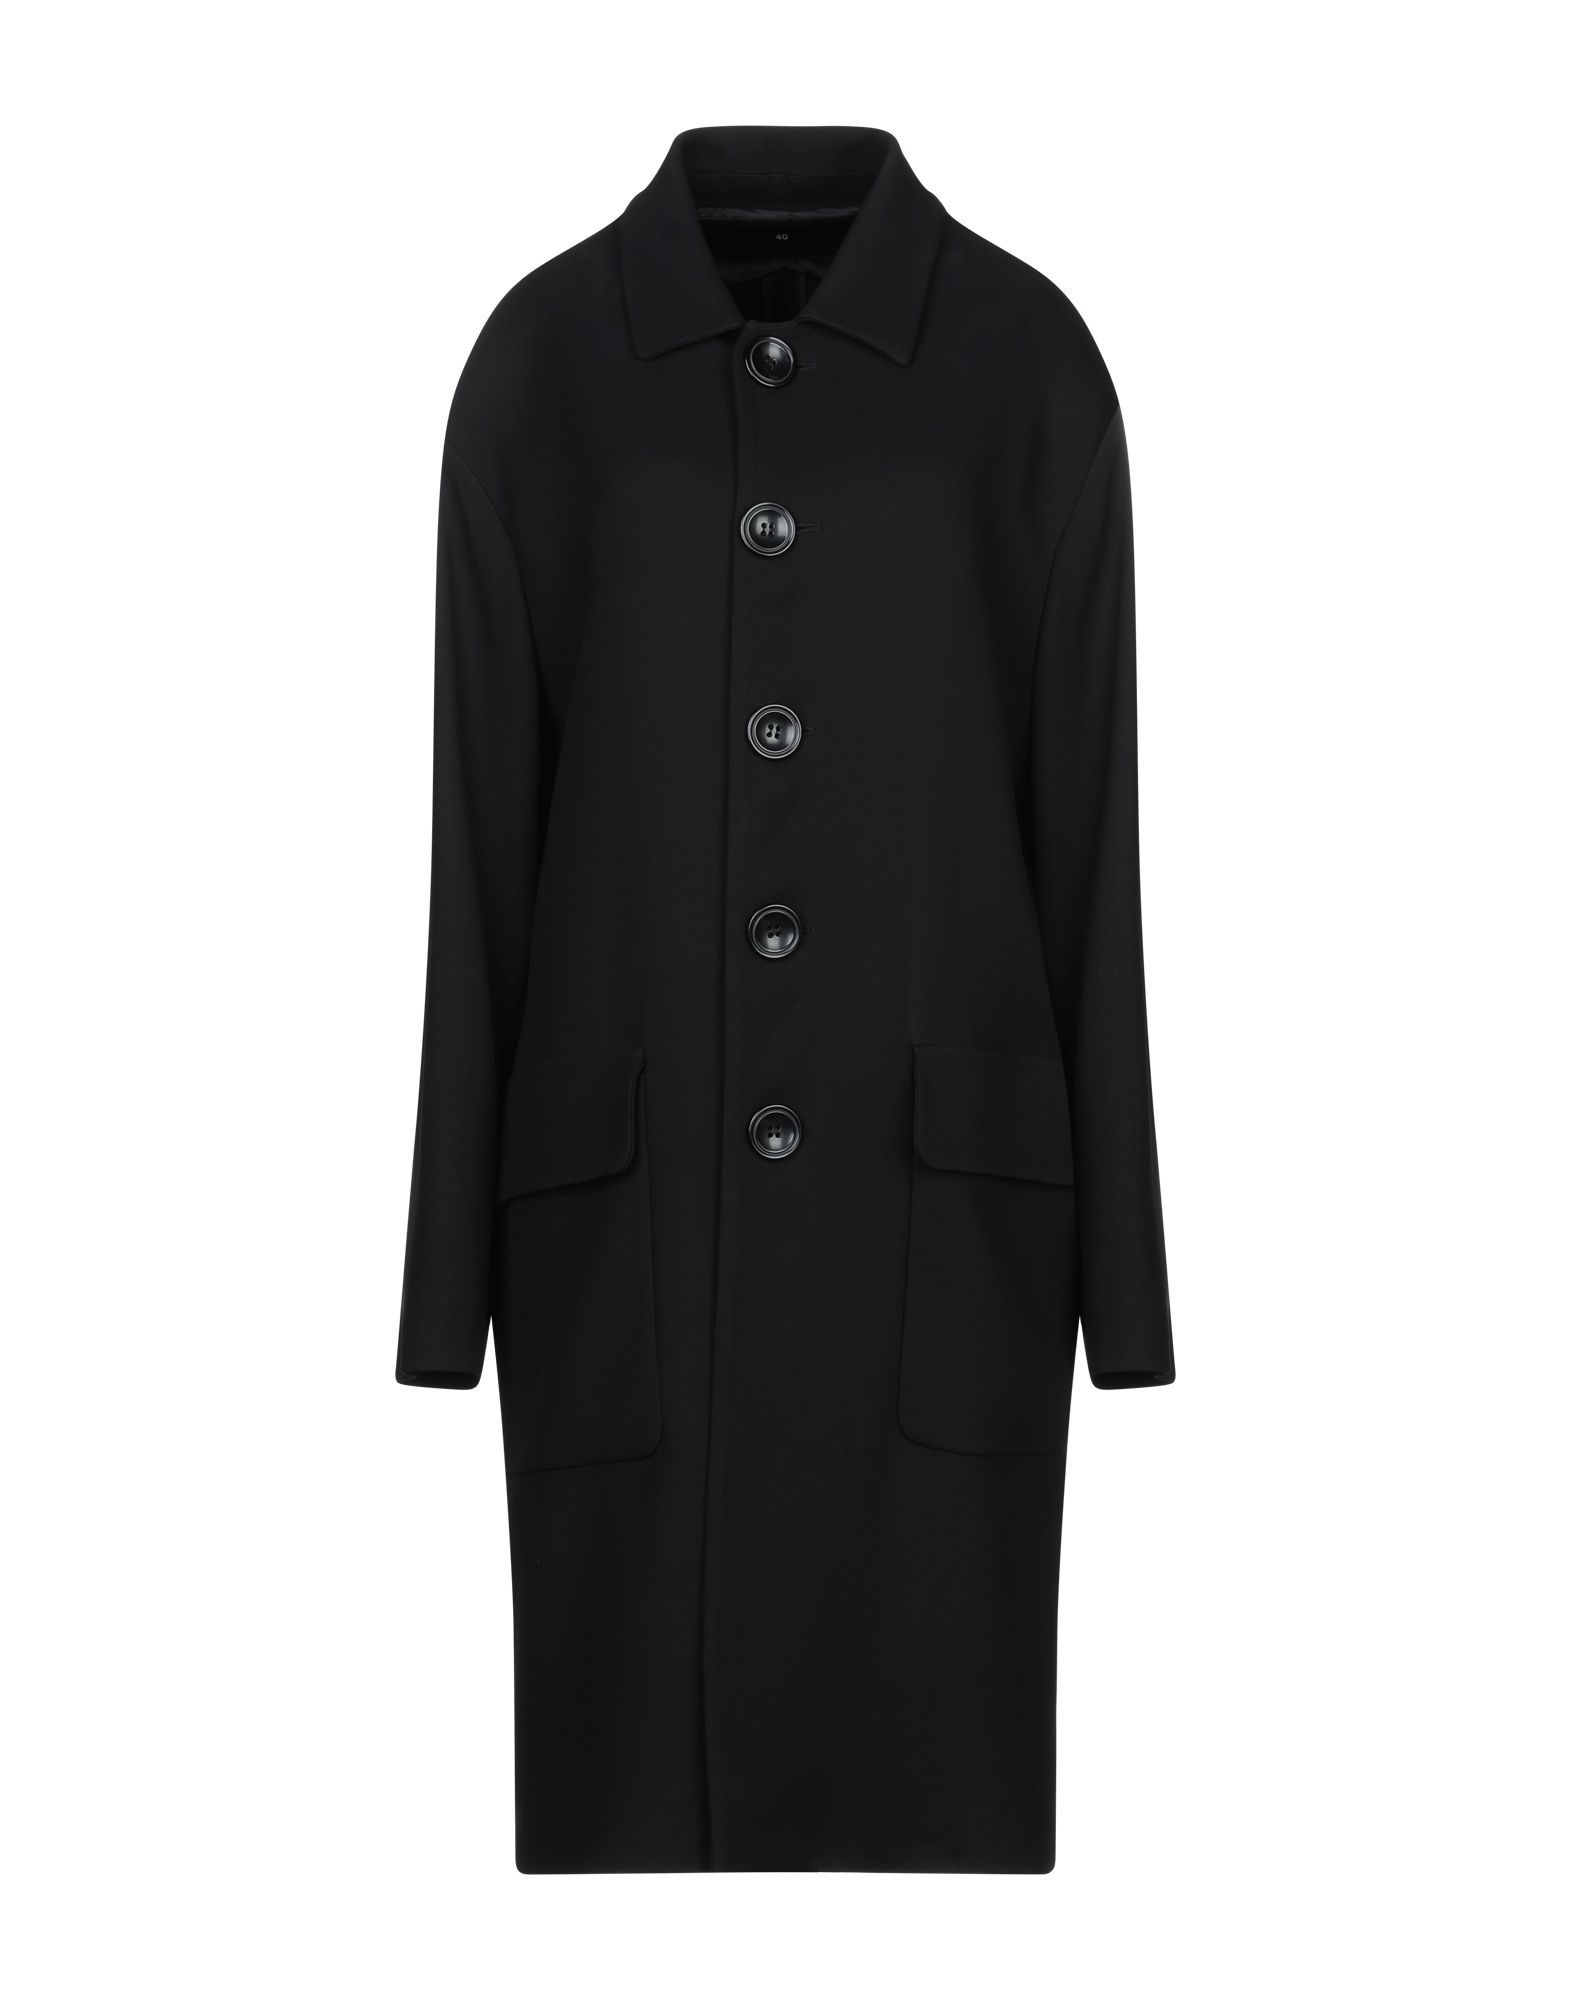 crepe, no appliqués, basic solid colour, single-breasted , button closing, classic neckline, multipockets, long sleeves, unlined, single-breasted jacket